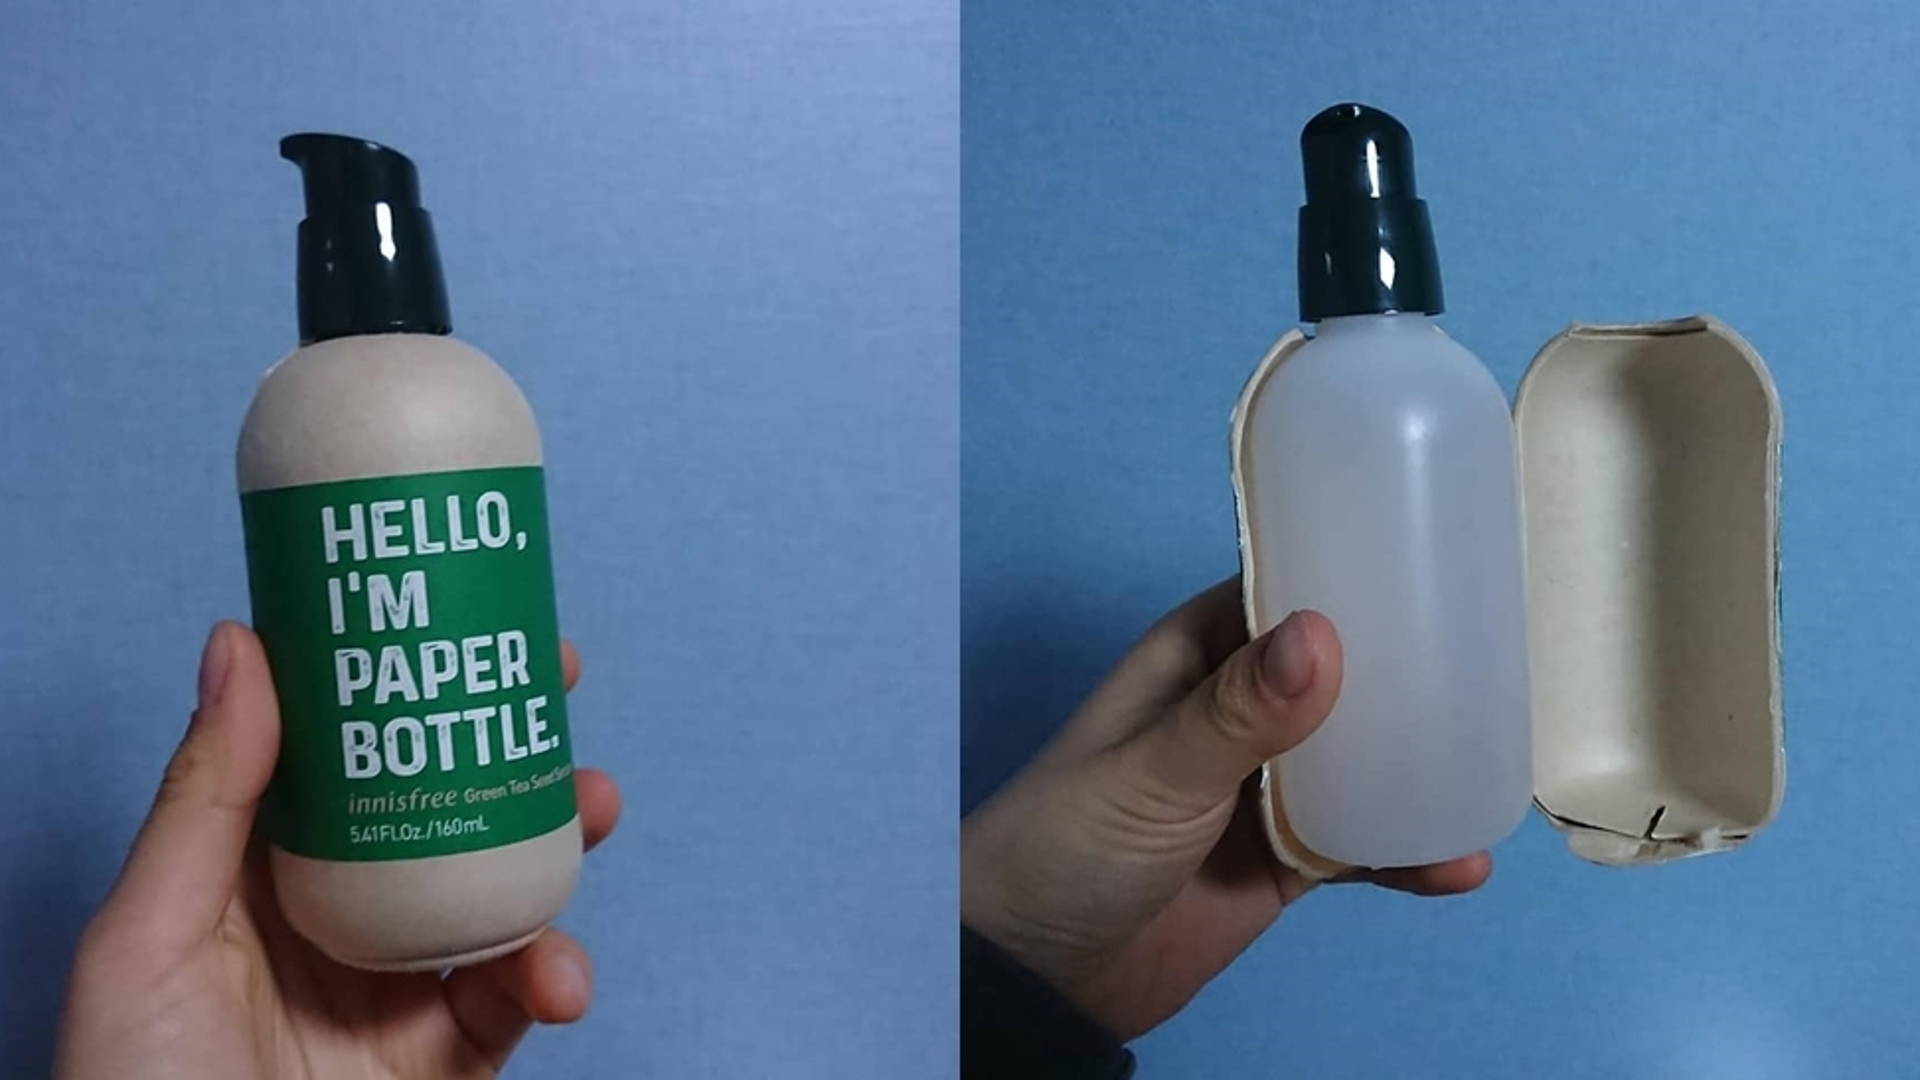 Hello, I'm A Paper Bottle' Turns Out To Have a Plastic Surprise Inside